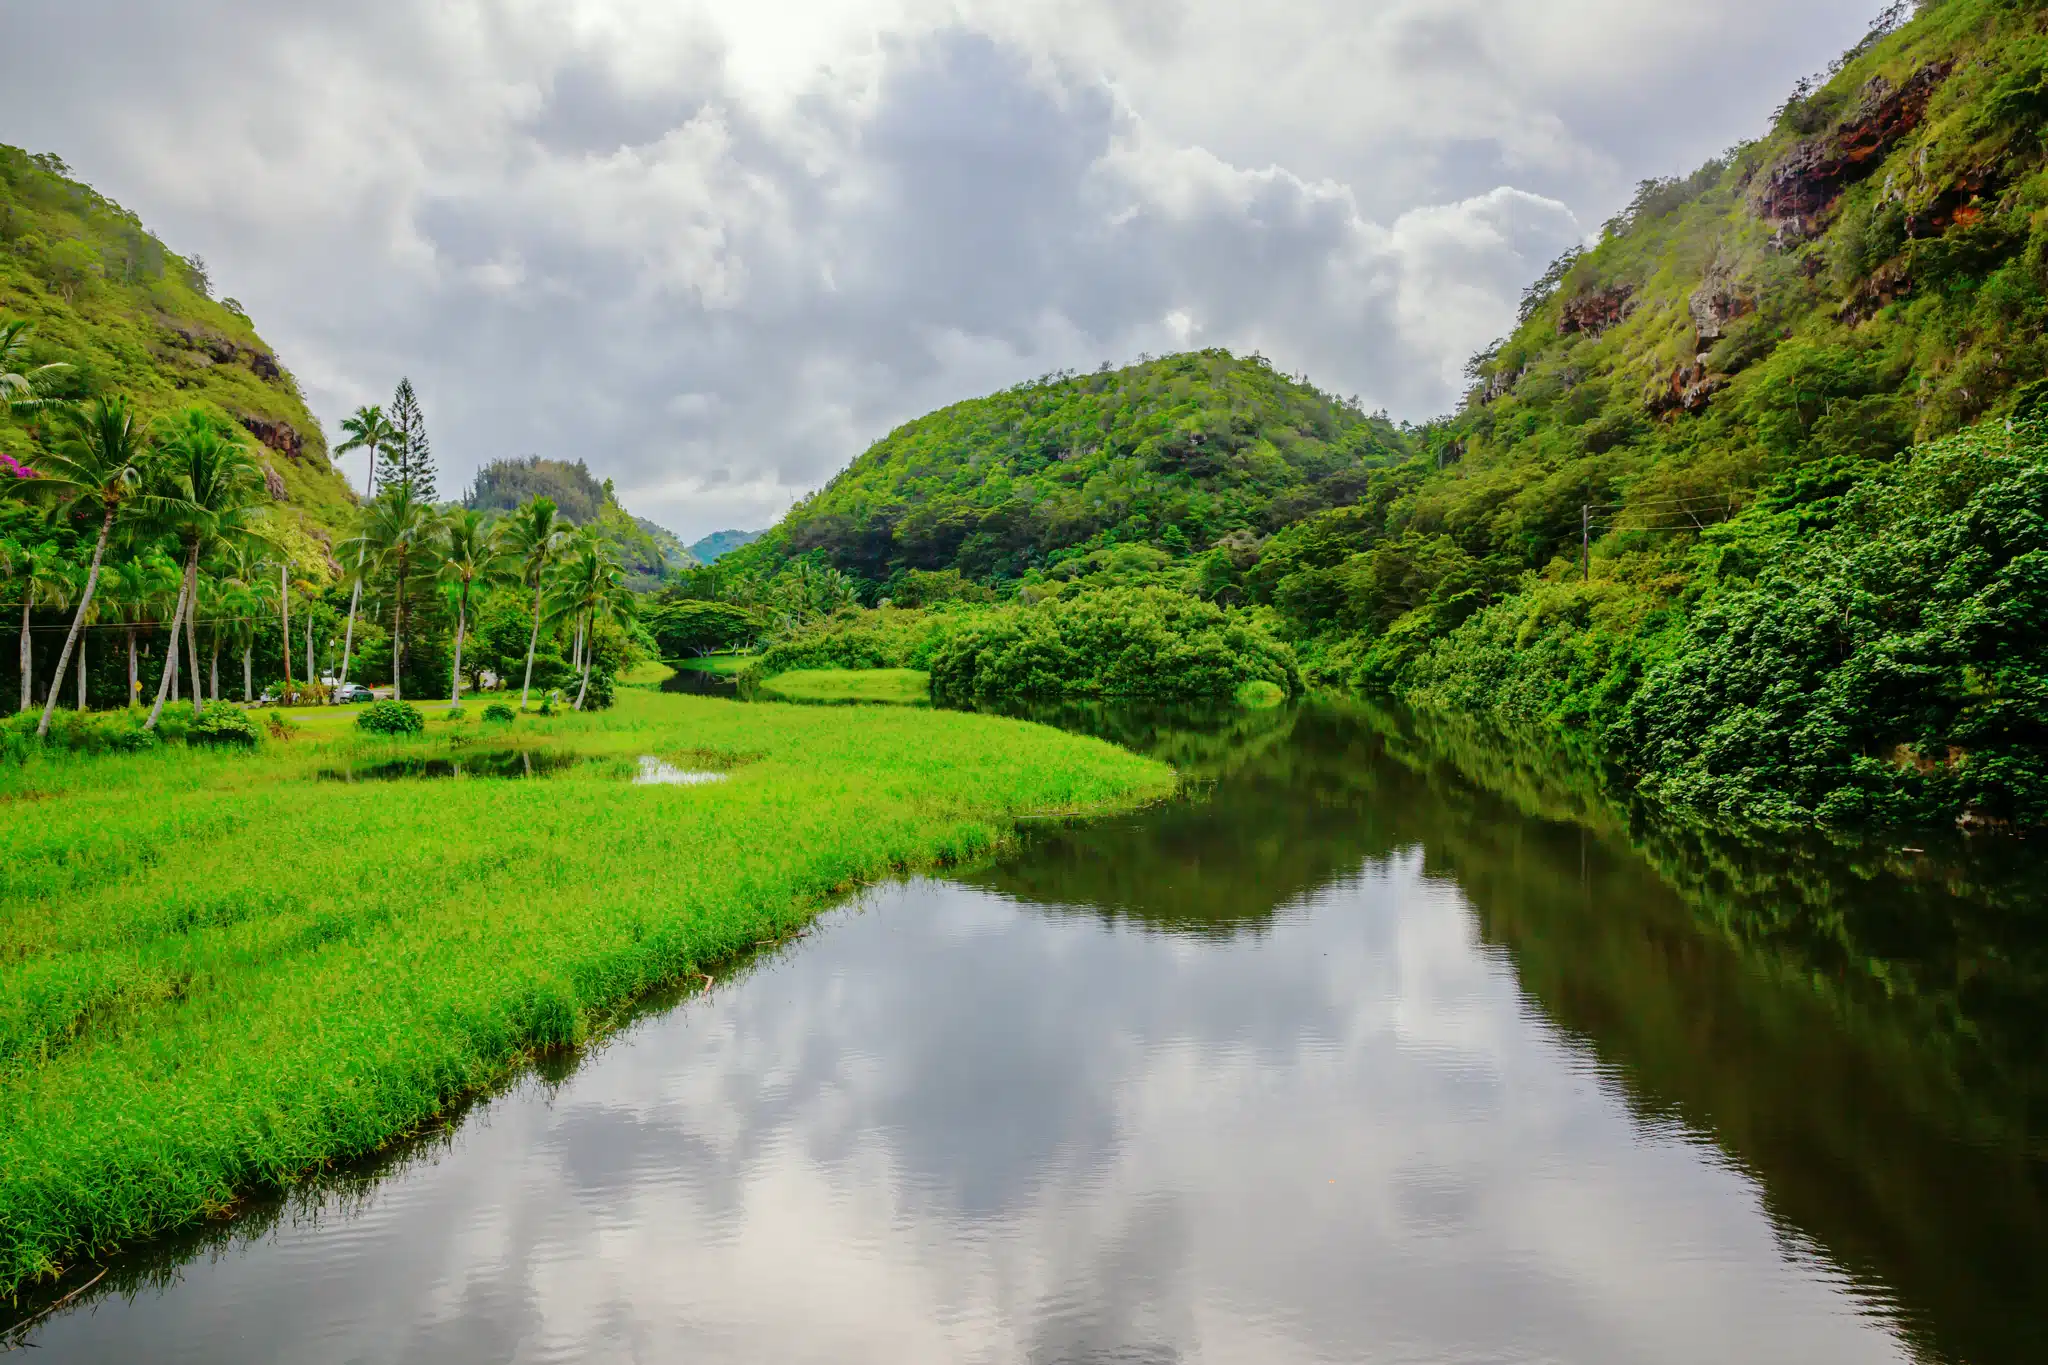 Waimea Valley is a Heritage Site located in the city of Haleiwa on Oahu, Hawaii